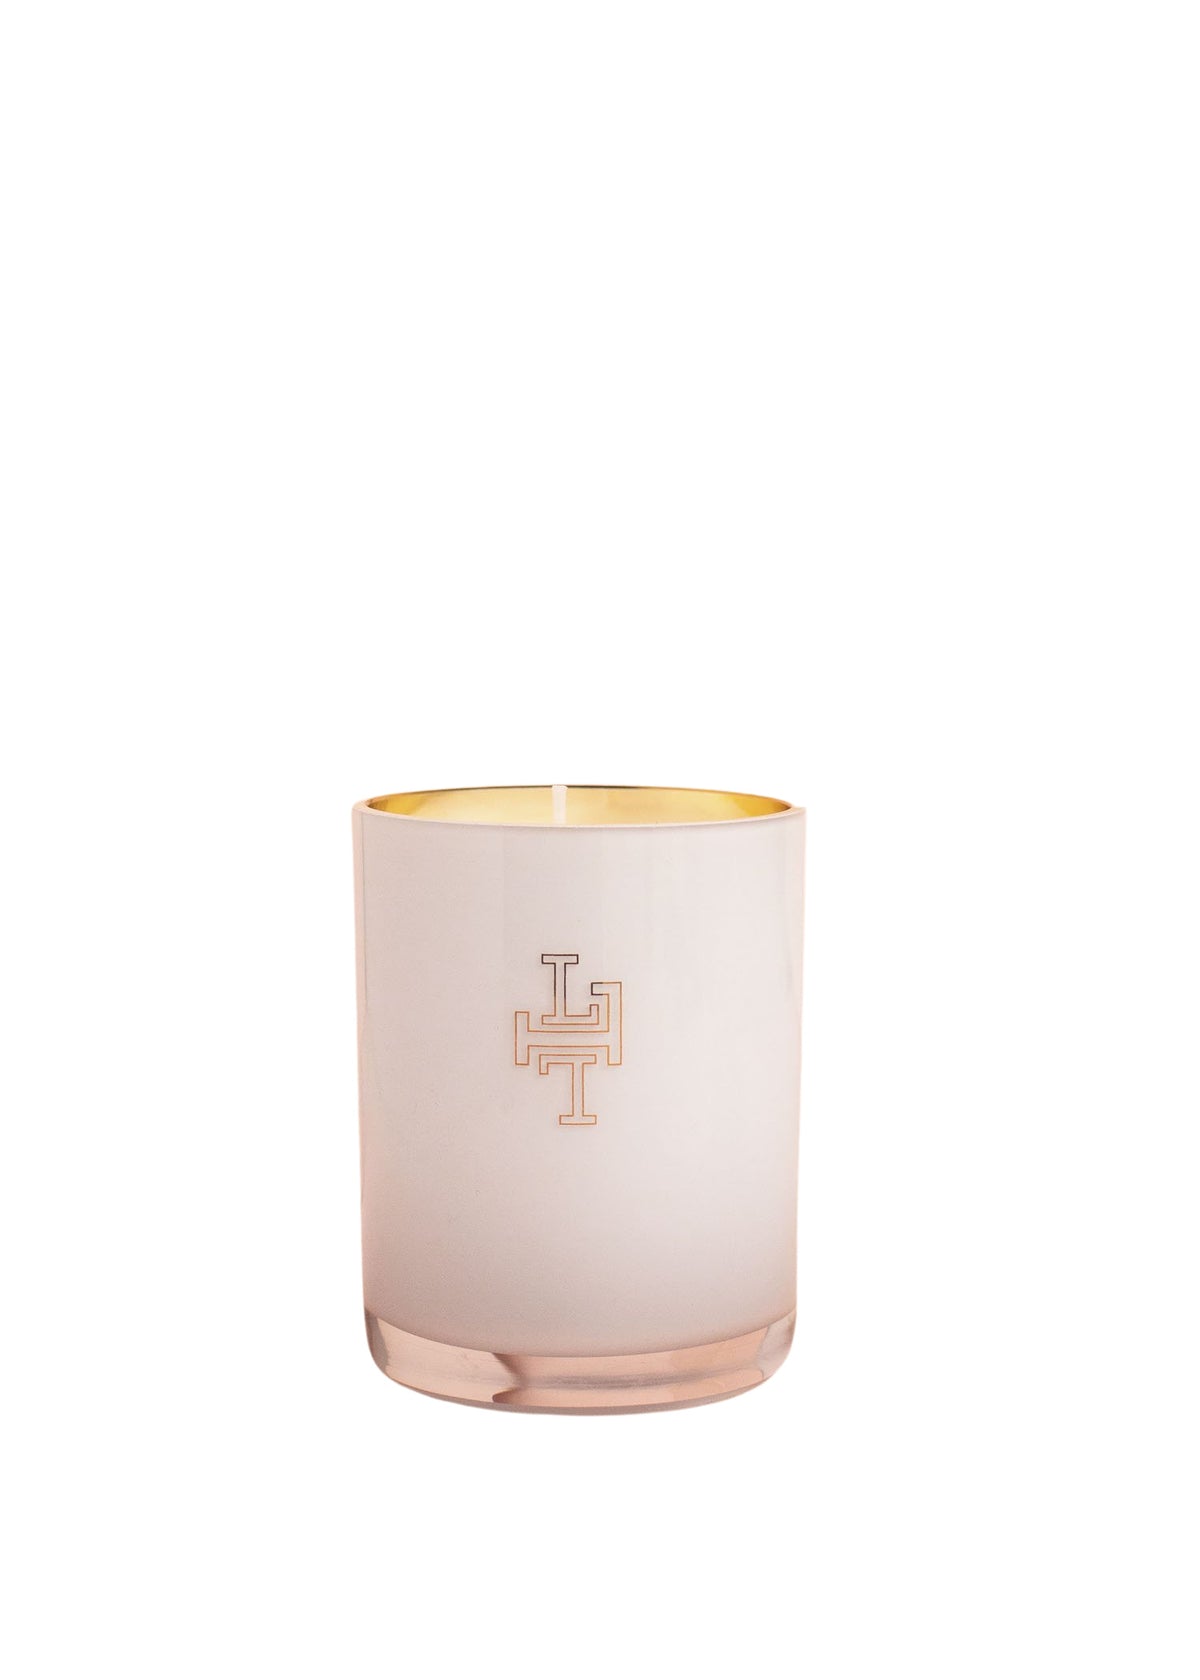 A pink-tinted cylindrical handblown glass candle holder with a white, cross-like emblem on the front and gold interior, against a white background for the Lollia Wish No. 22 Luminary Candle by Margot Elena.